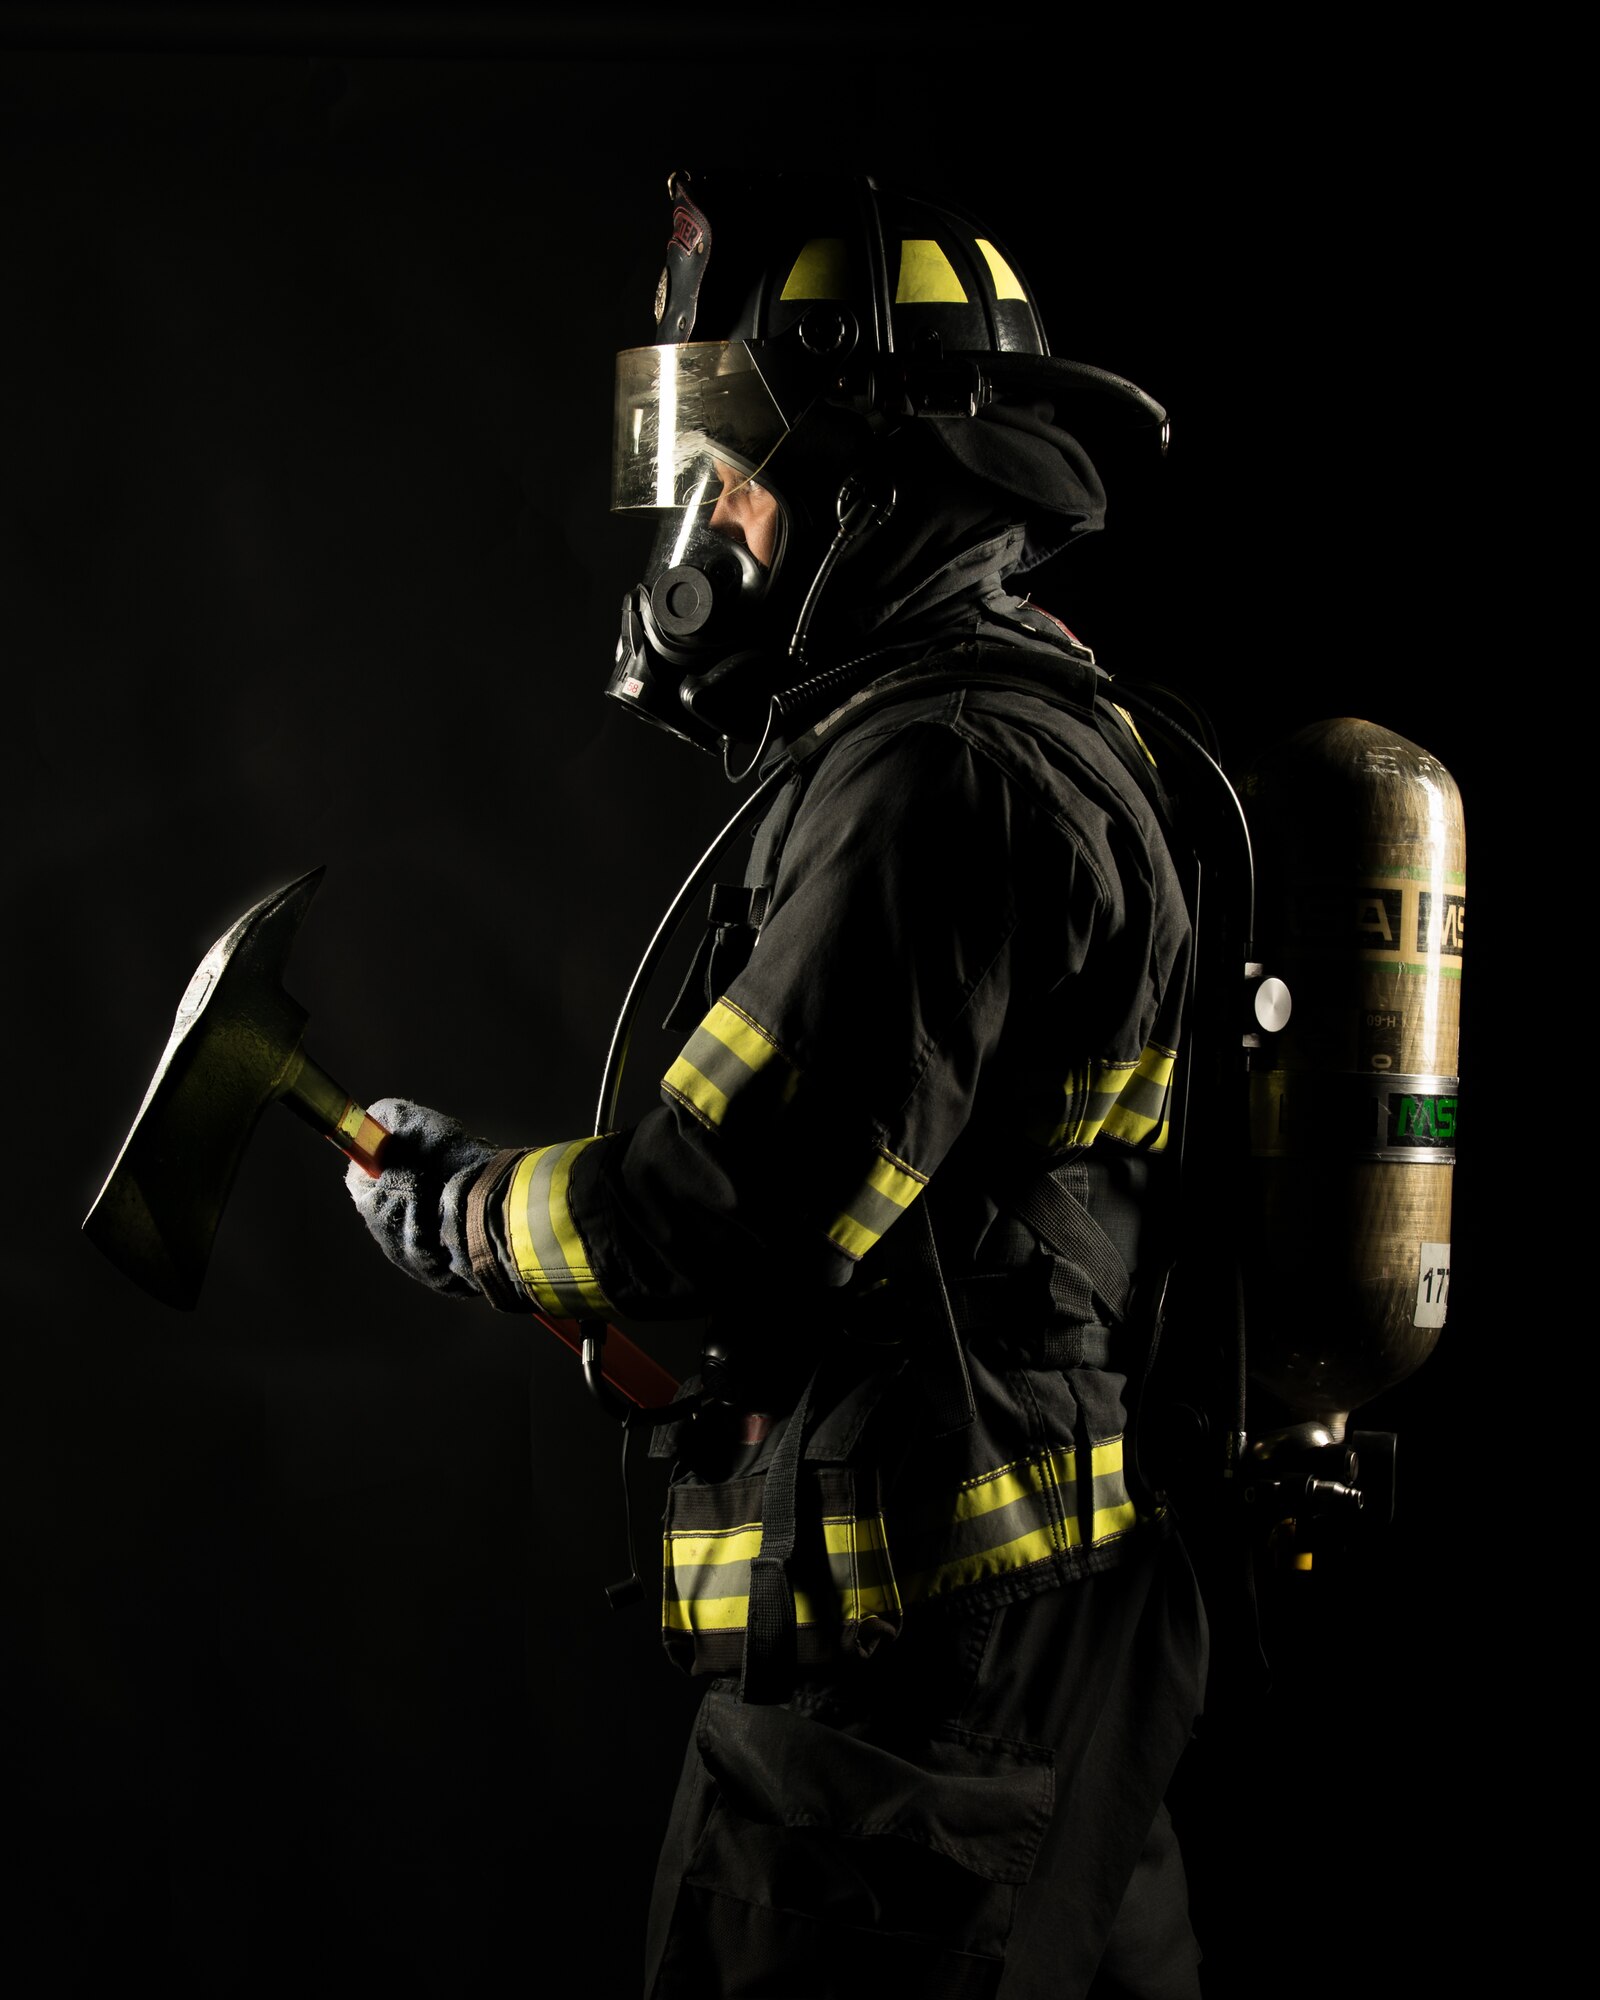 Airman 1st Class Dylan Dykes, 436th Civil Engineer Squadron driver operator, poses Oct. 1, 2019, at Dover Air Force Base, Del. During Fire Prevention Week, the 436th CES firefighters provide the Dover community with lifesaving education in an effort to decrease fire safety hazards.  (U.S. Air Force photo by Mauricio Campino)